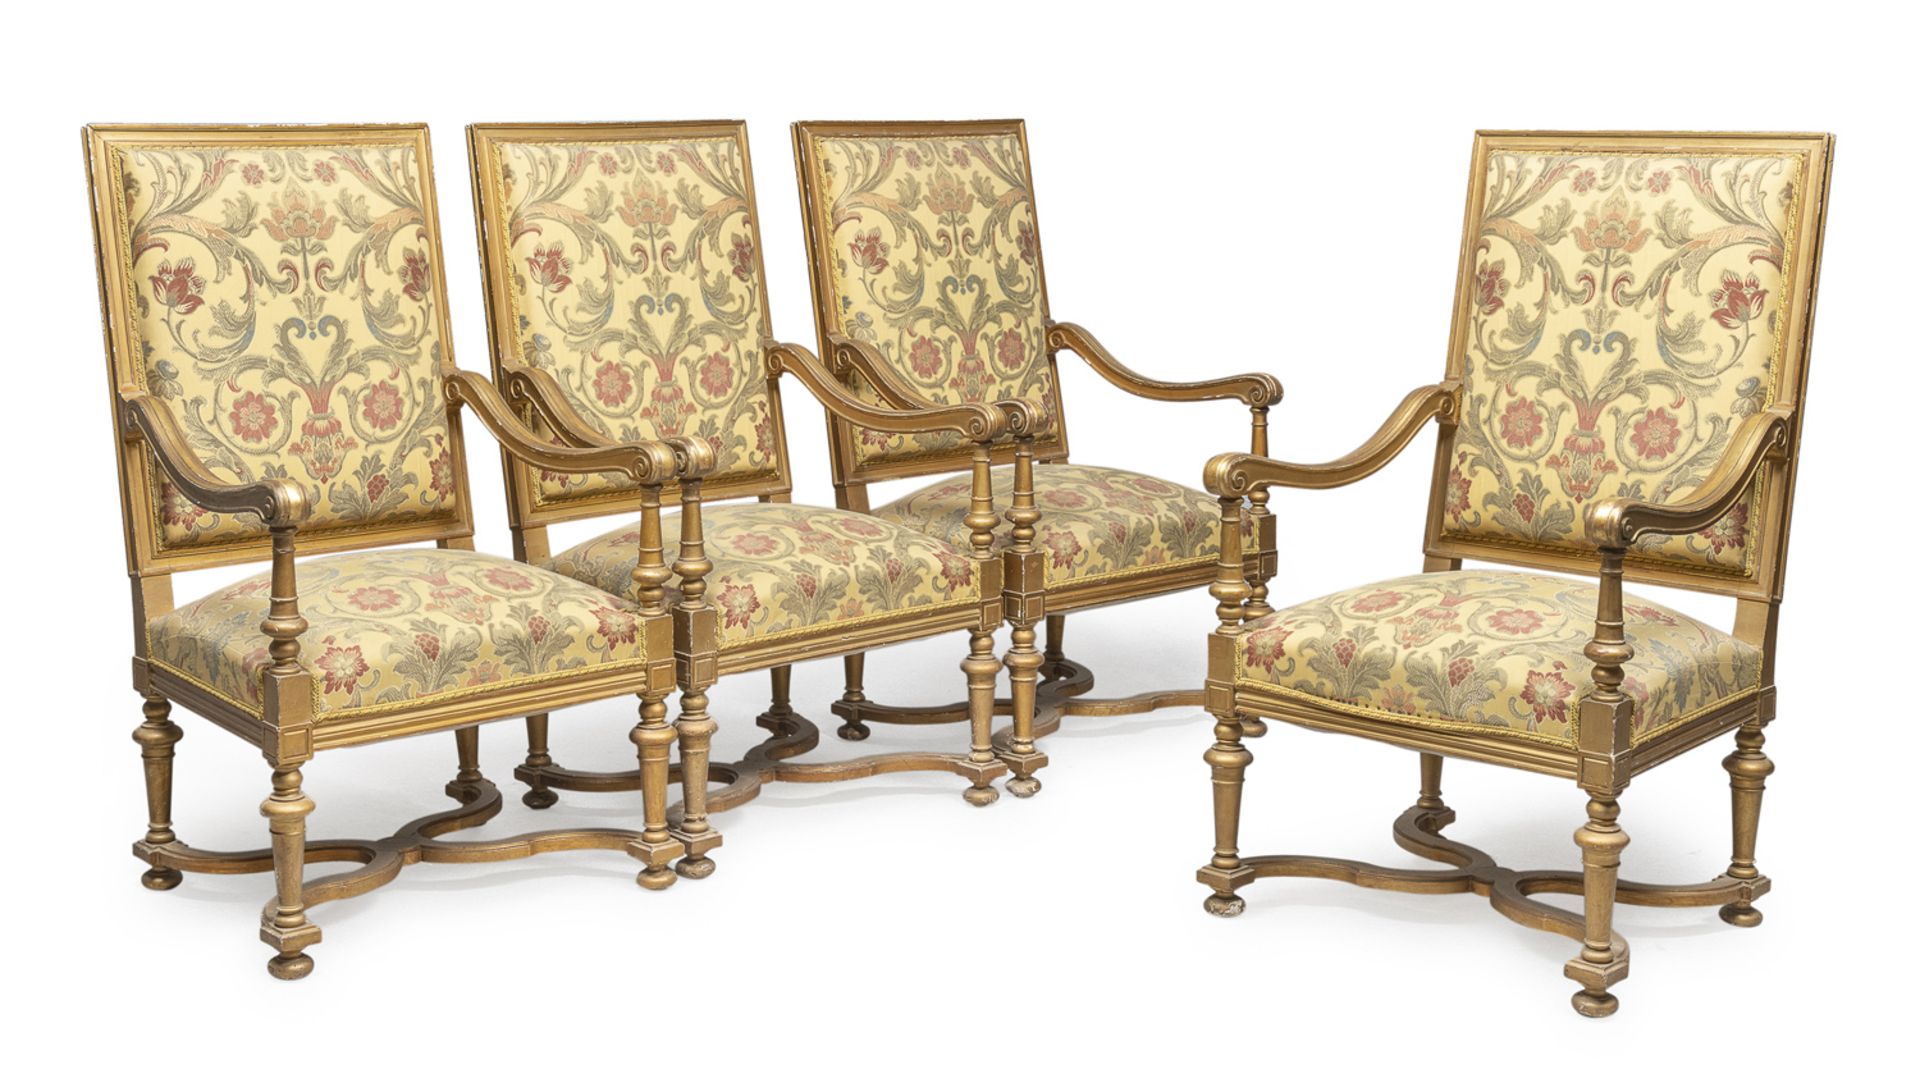 FOUR ARMCHAIRS IN GILTWOOD